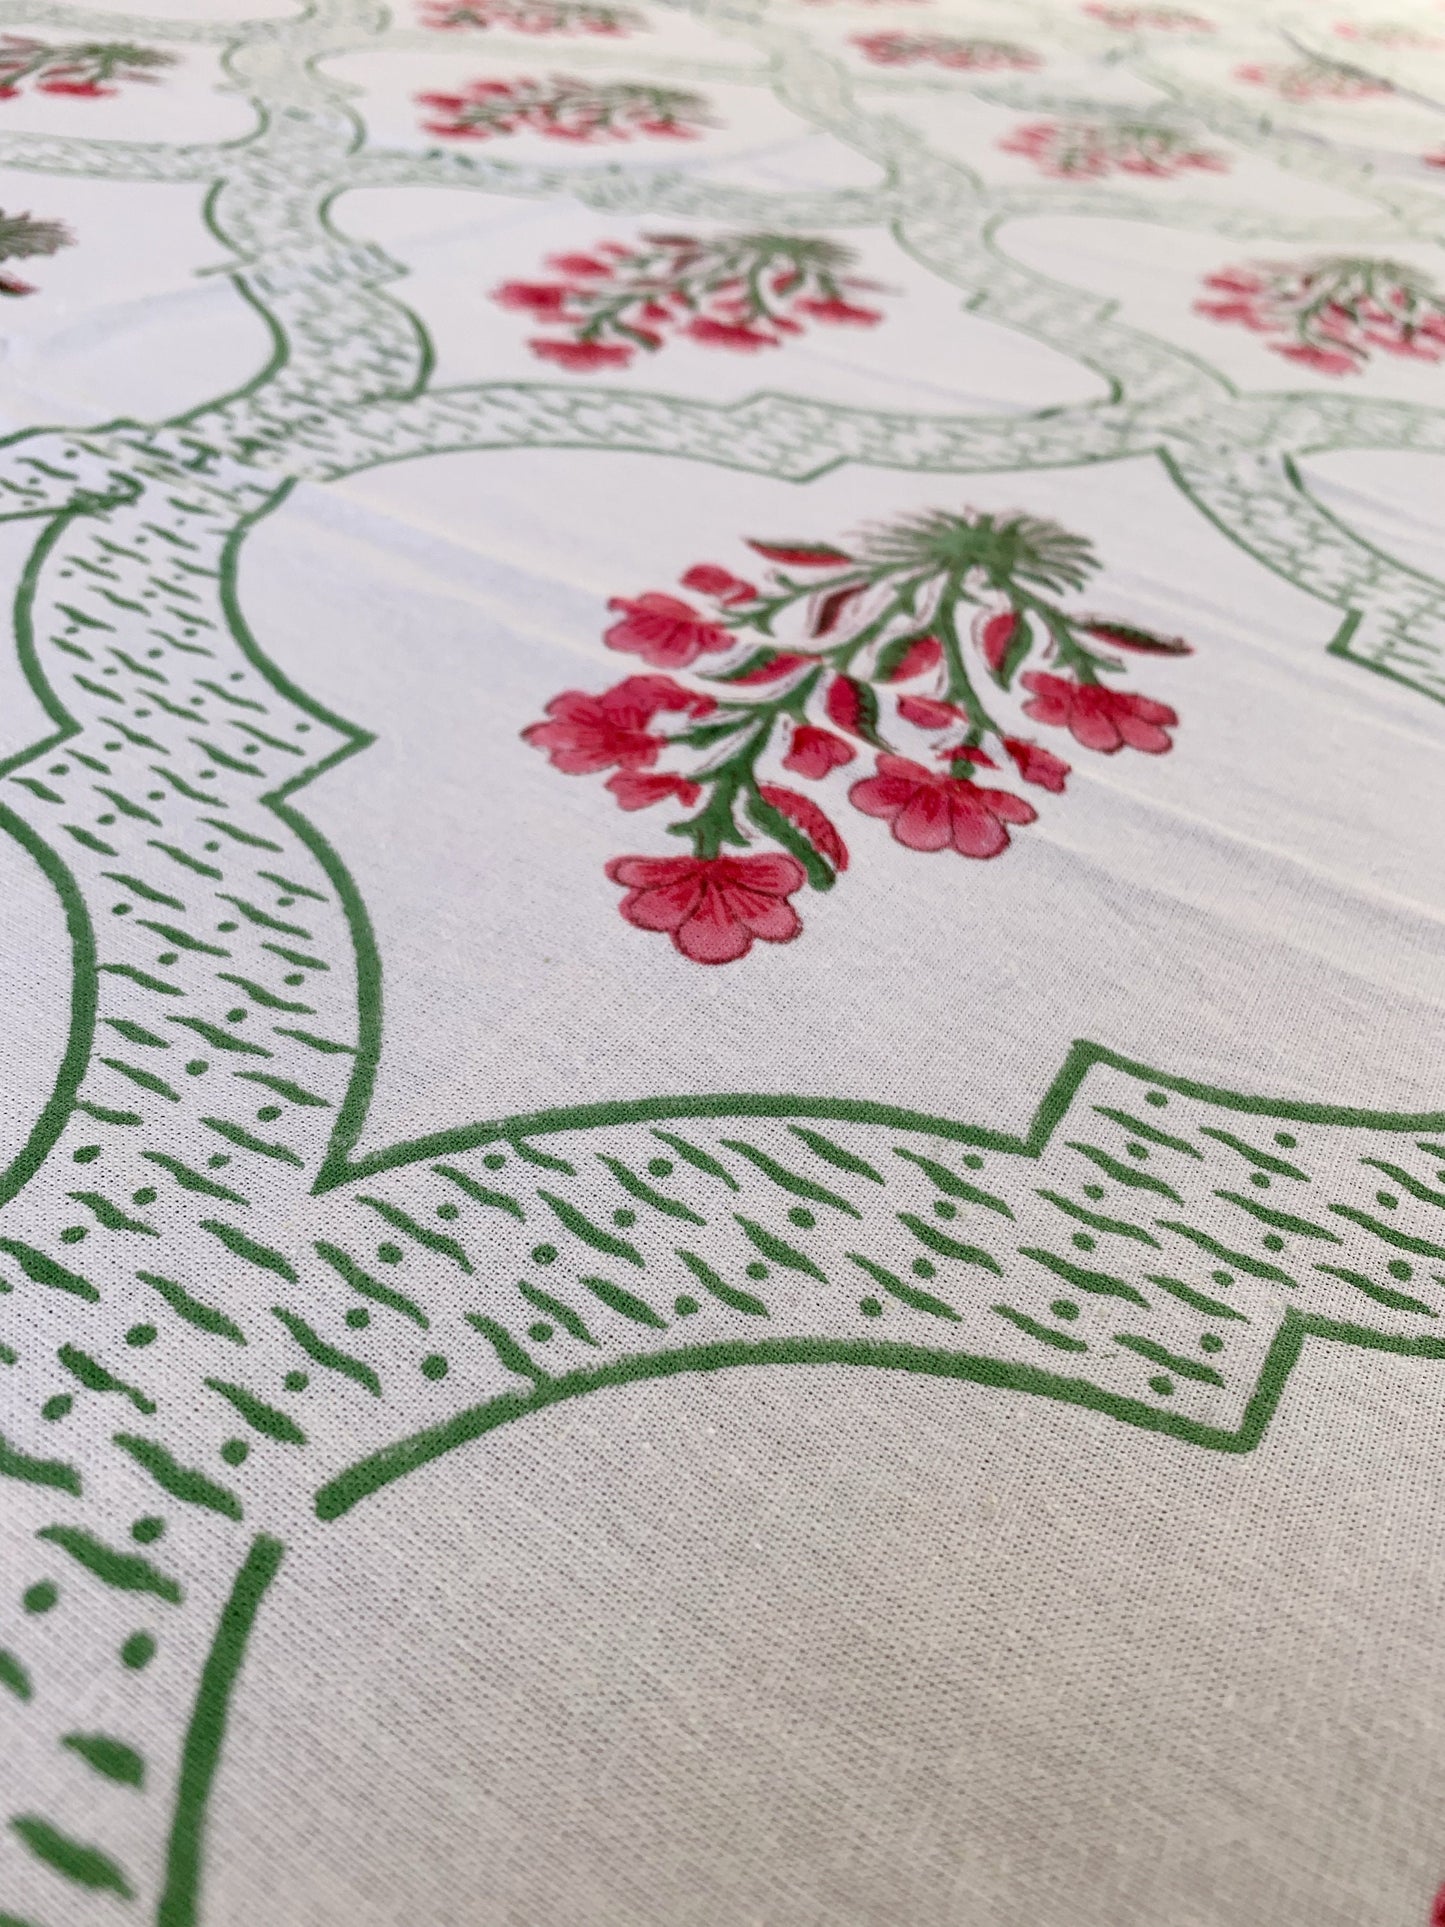 Pure cotton block print tablecloth handmade in India · Six diners · Boho chic tablecloth 100% Indian cotton · Mughal white pink